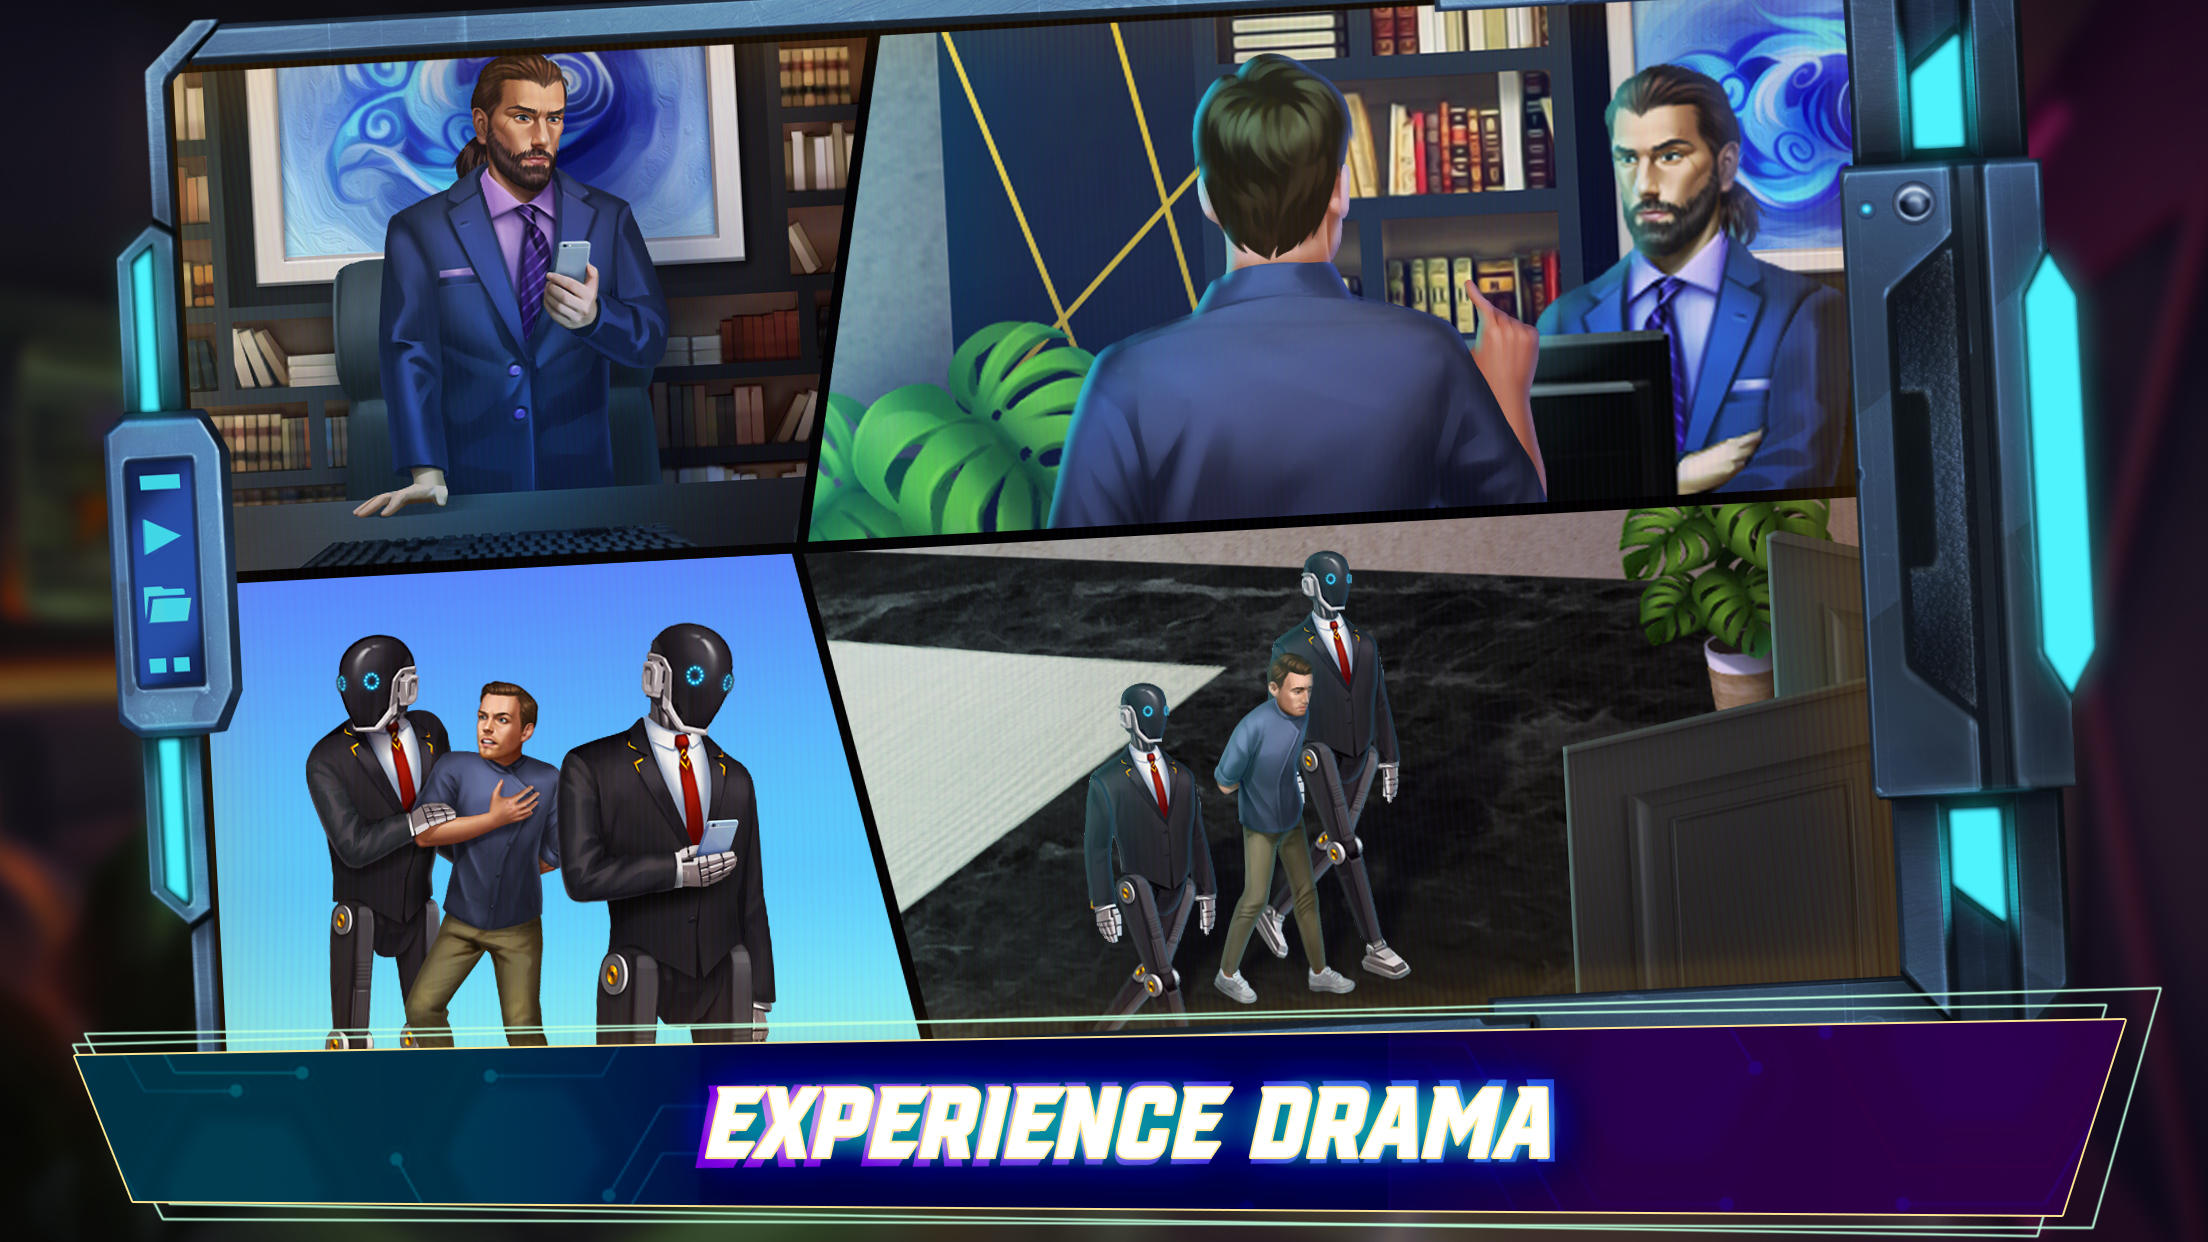 Murder Mystery 2 Aid APK for Android Download